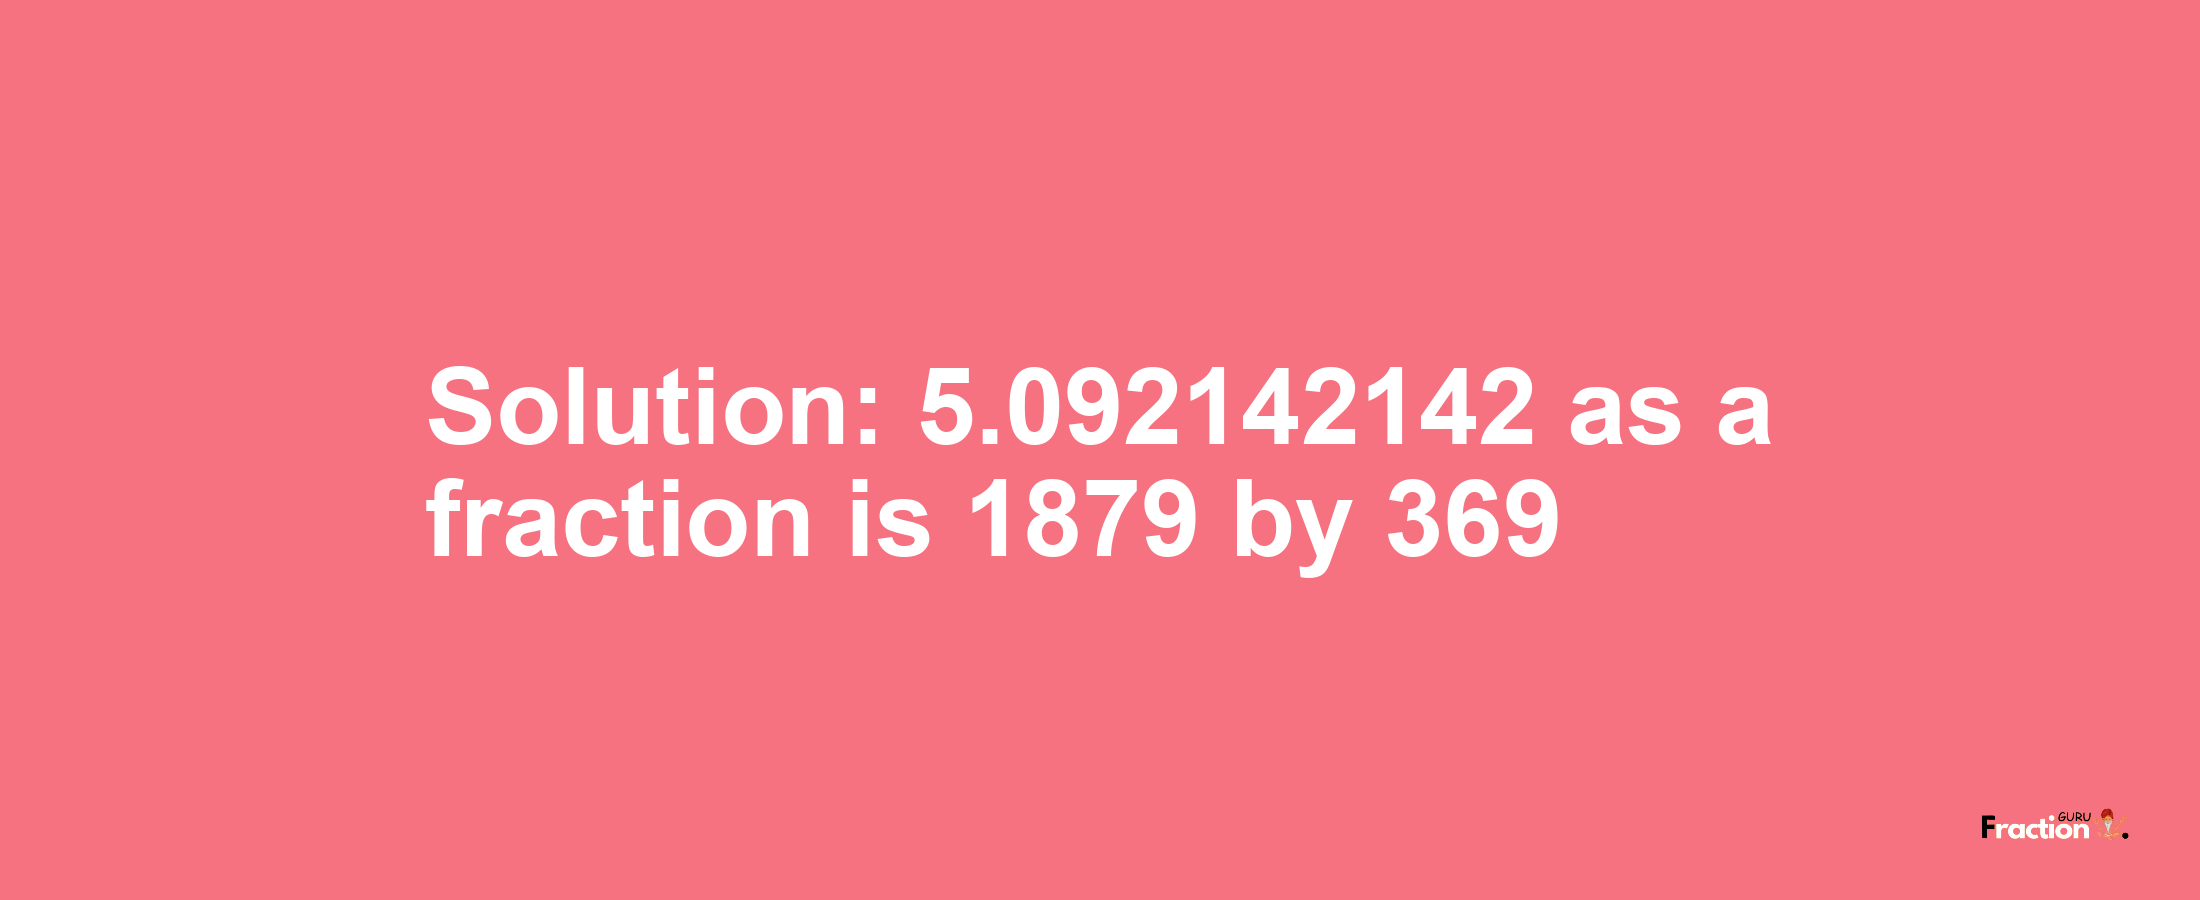 Solution:5.092142142 as a fraction is 1879/369